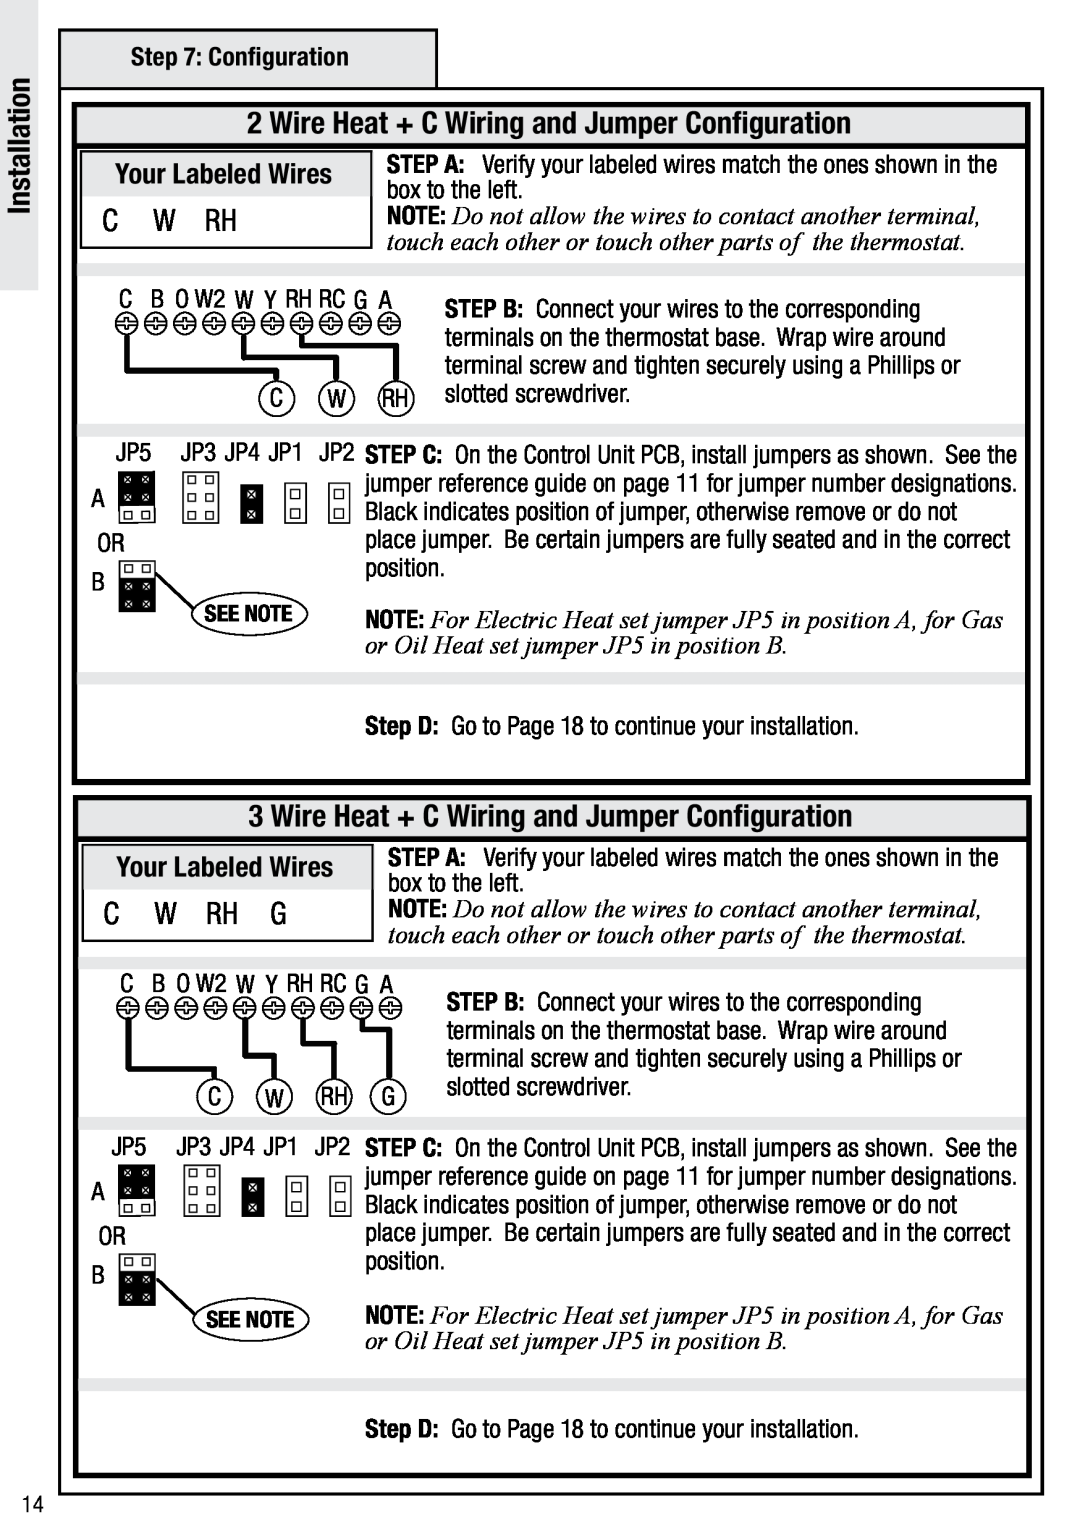 Wayne-Dalton WDTC-20 user manual Wire Heat + C Wiring and Jumper Configuration, W Rh, Your Labeled Wires, Installation 